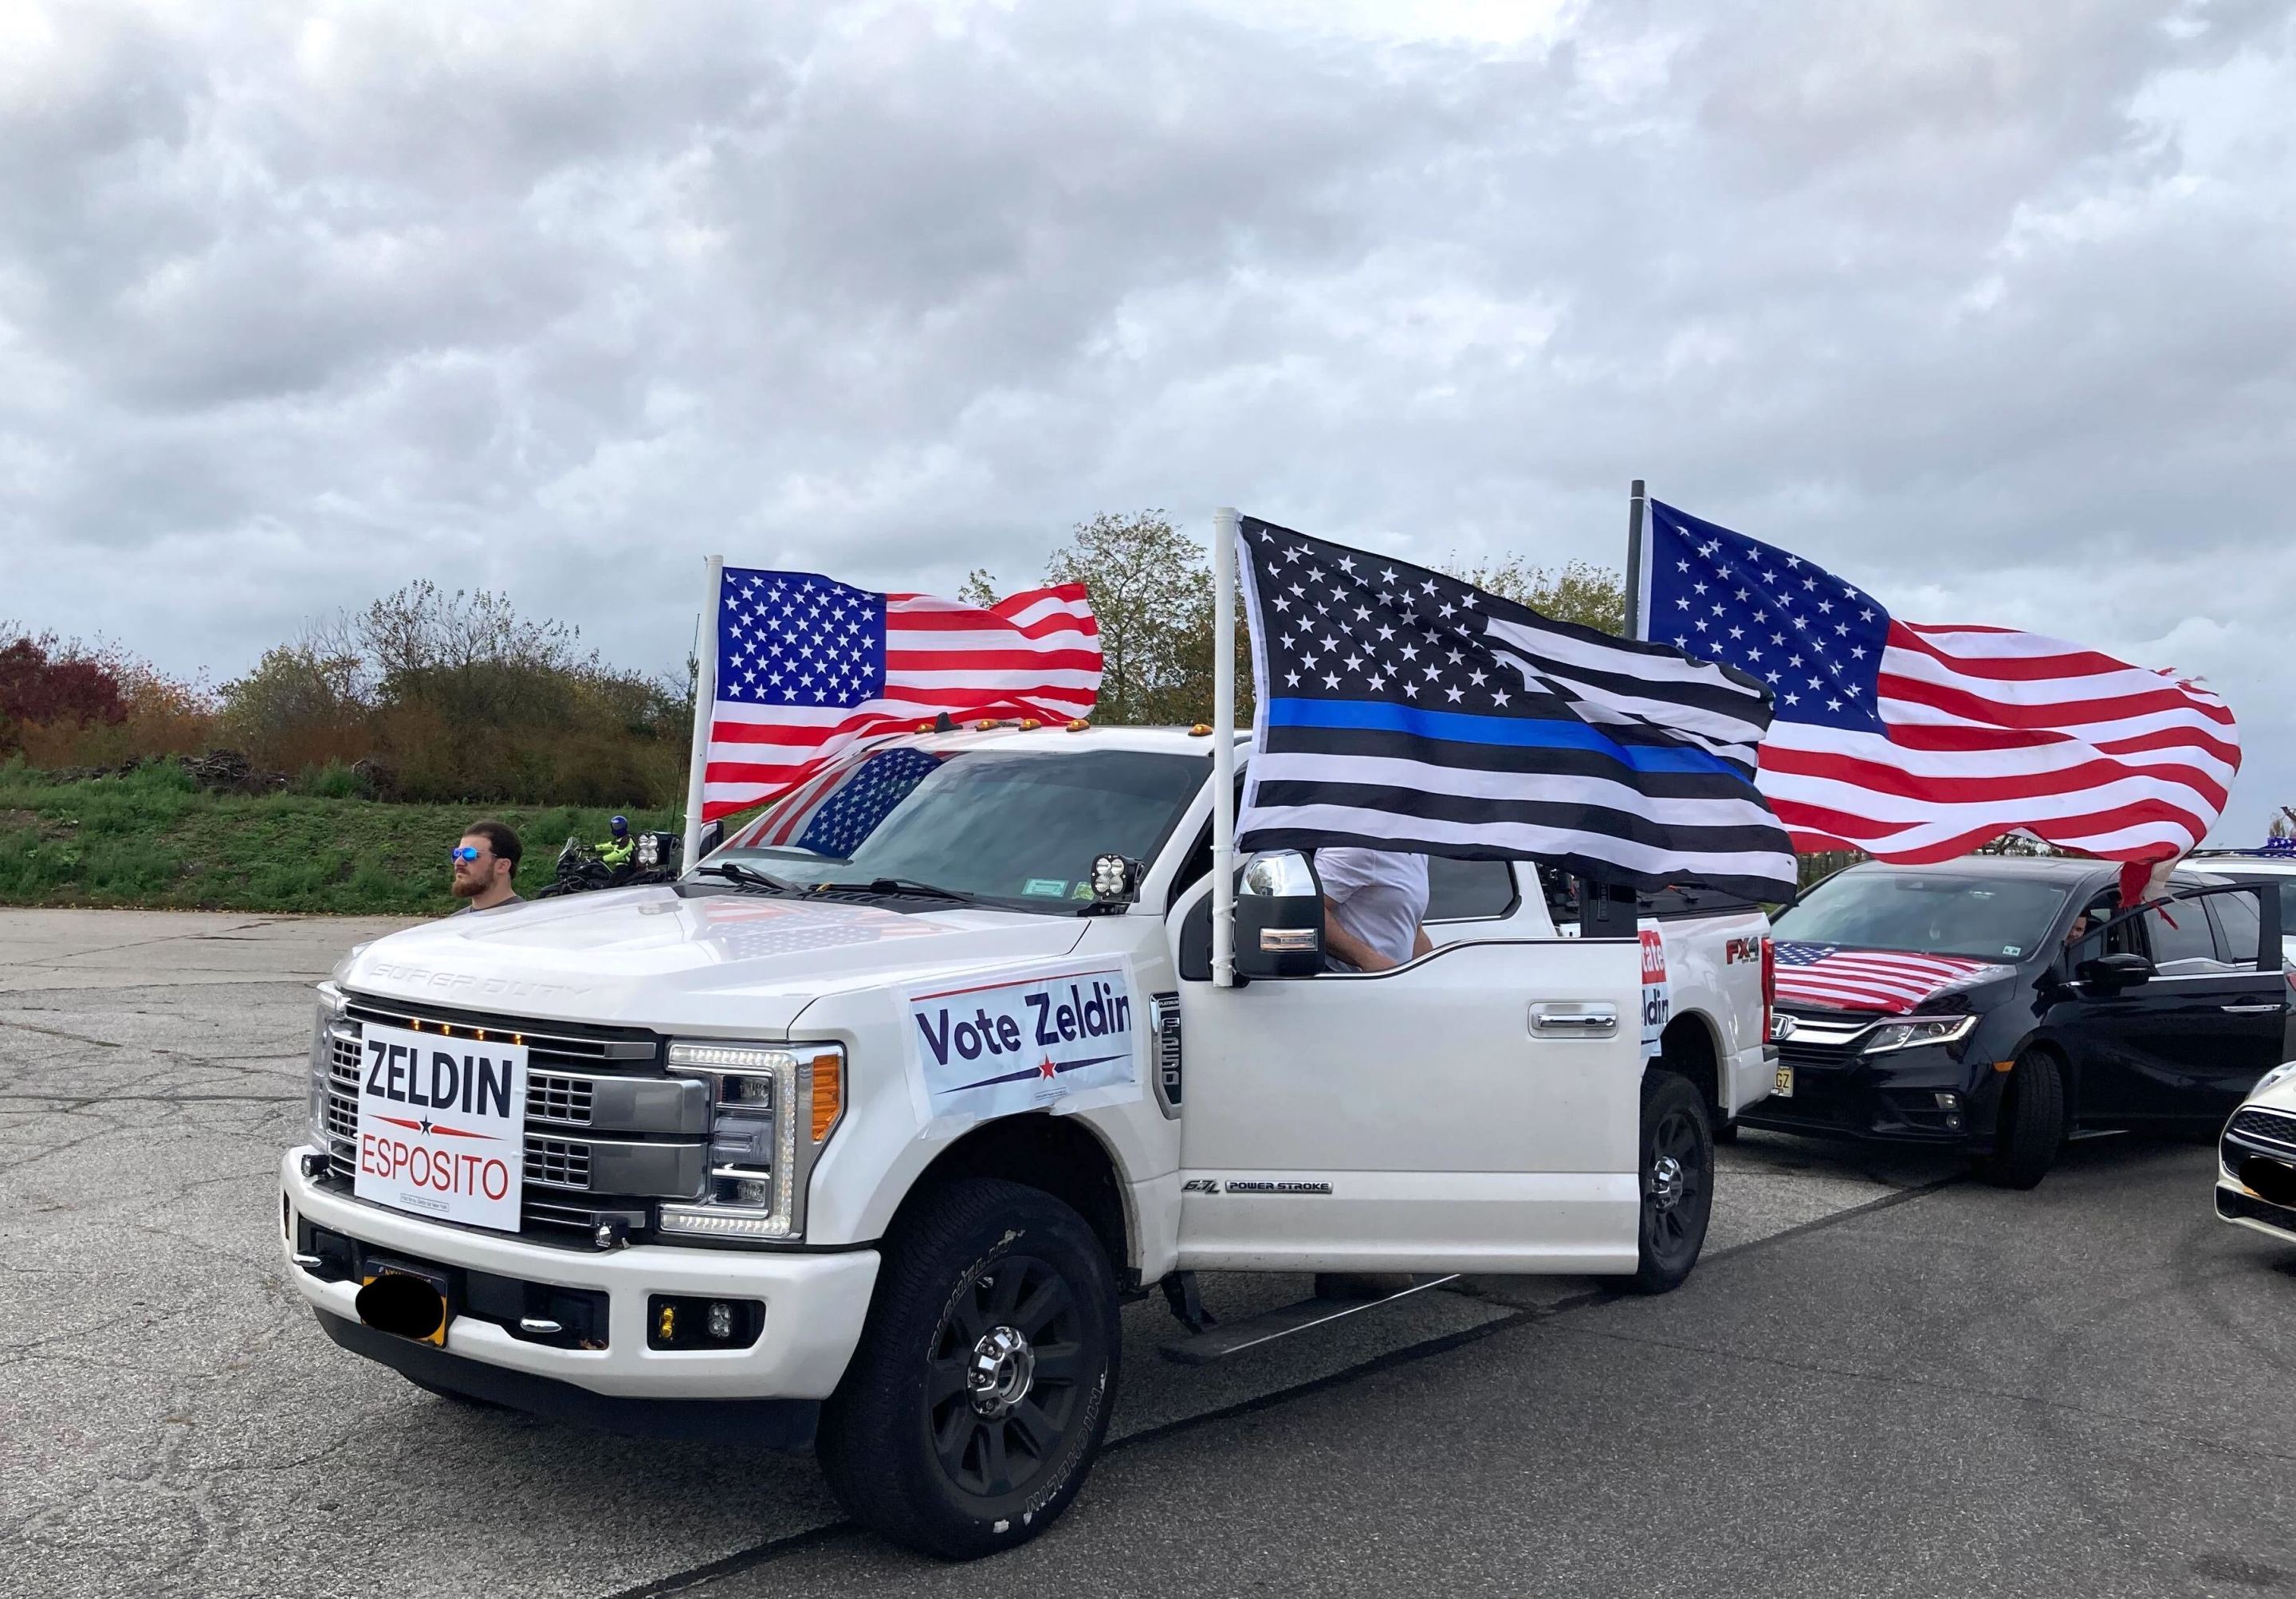 A huge white Ford pickup truck sporting American flags and Thin Blue Line flags and Lee Zeldin posters.